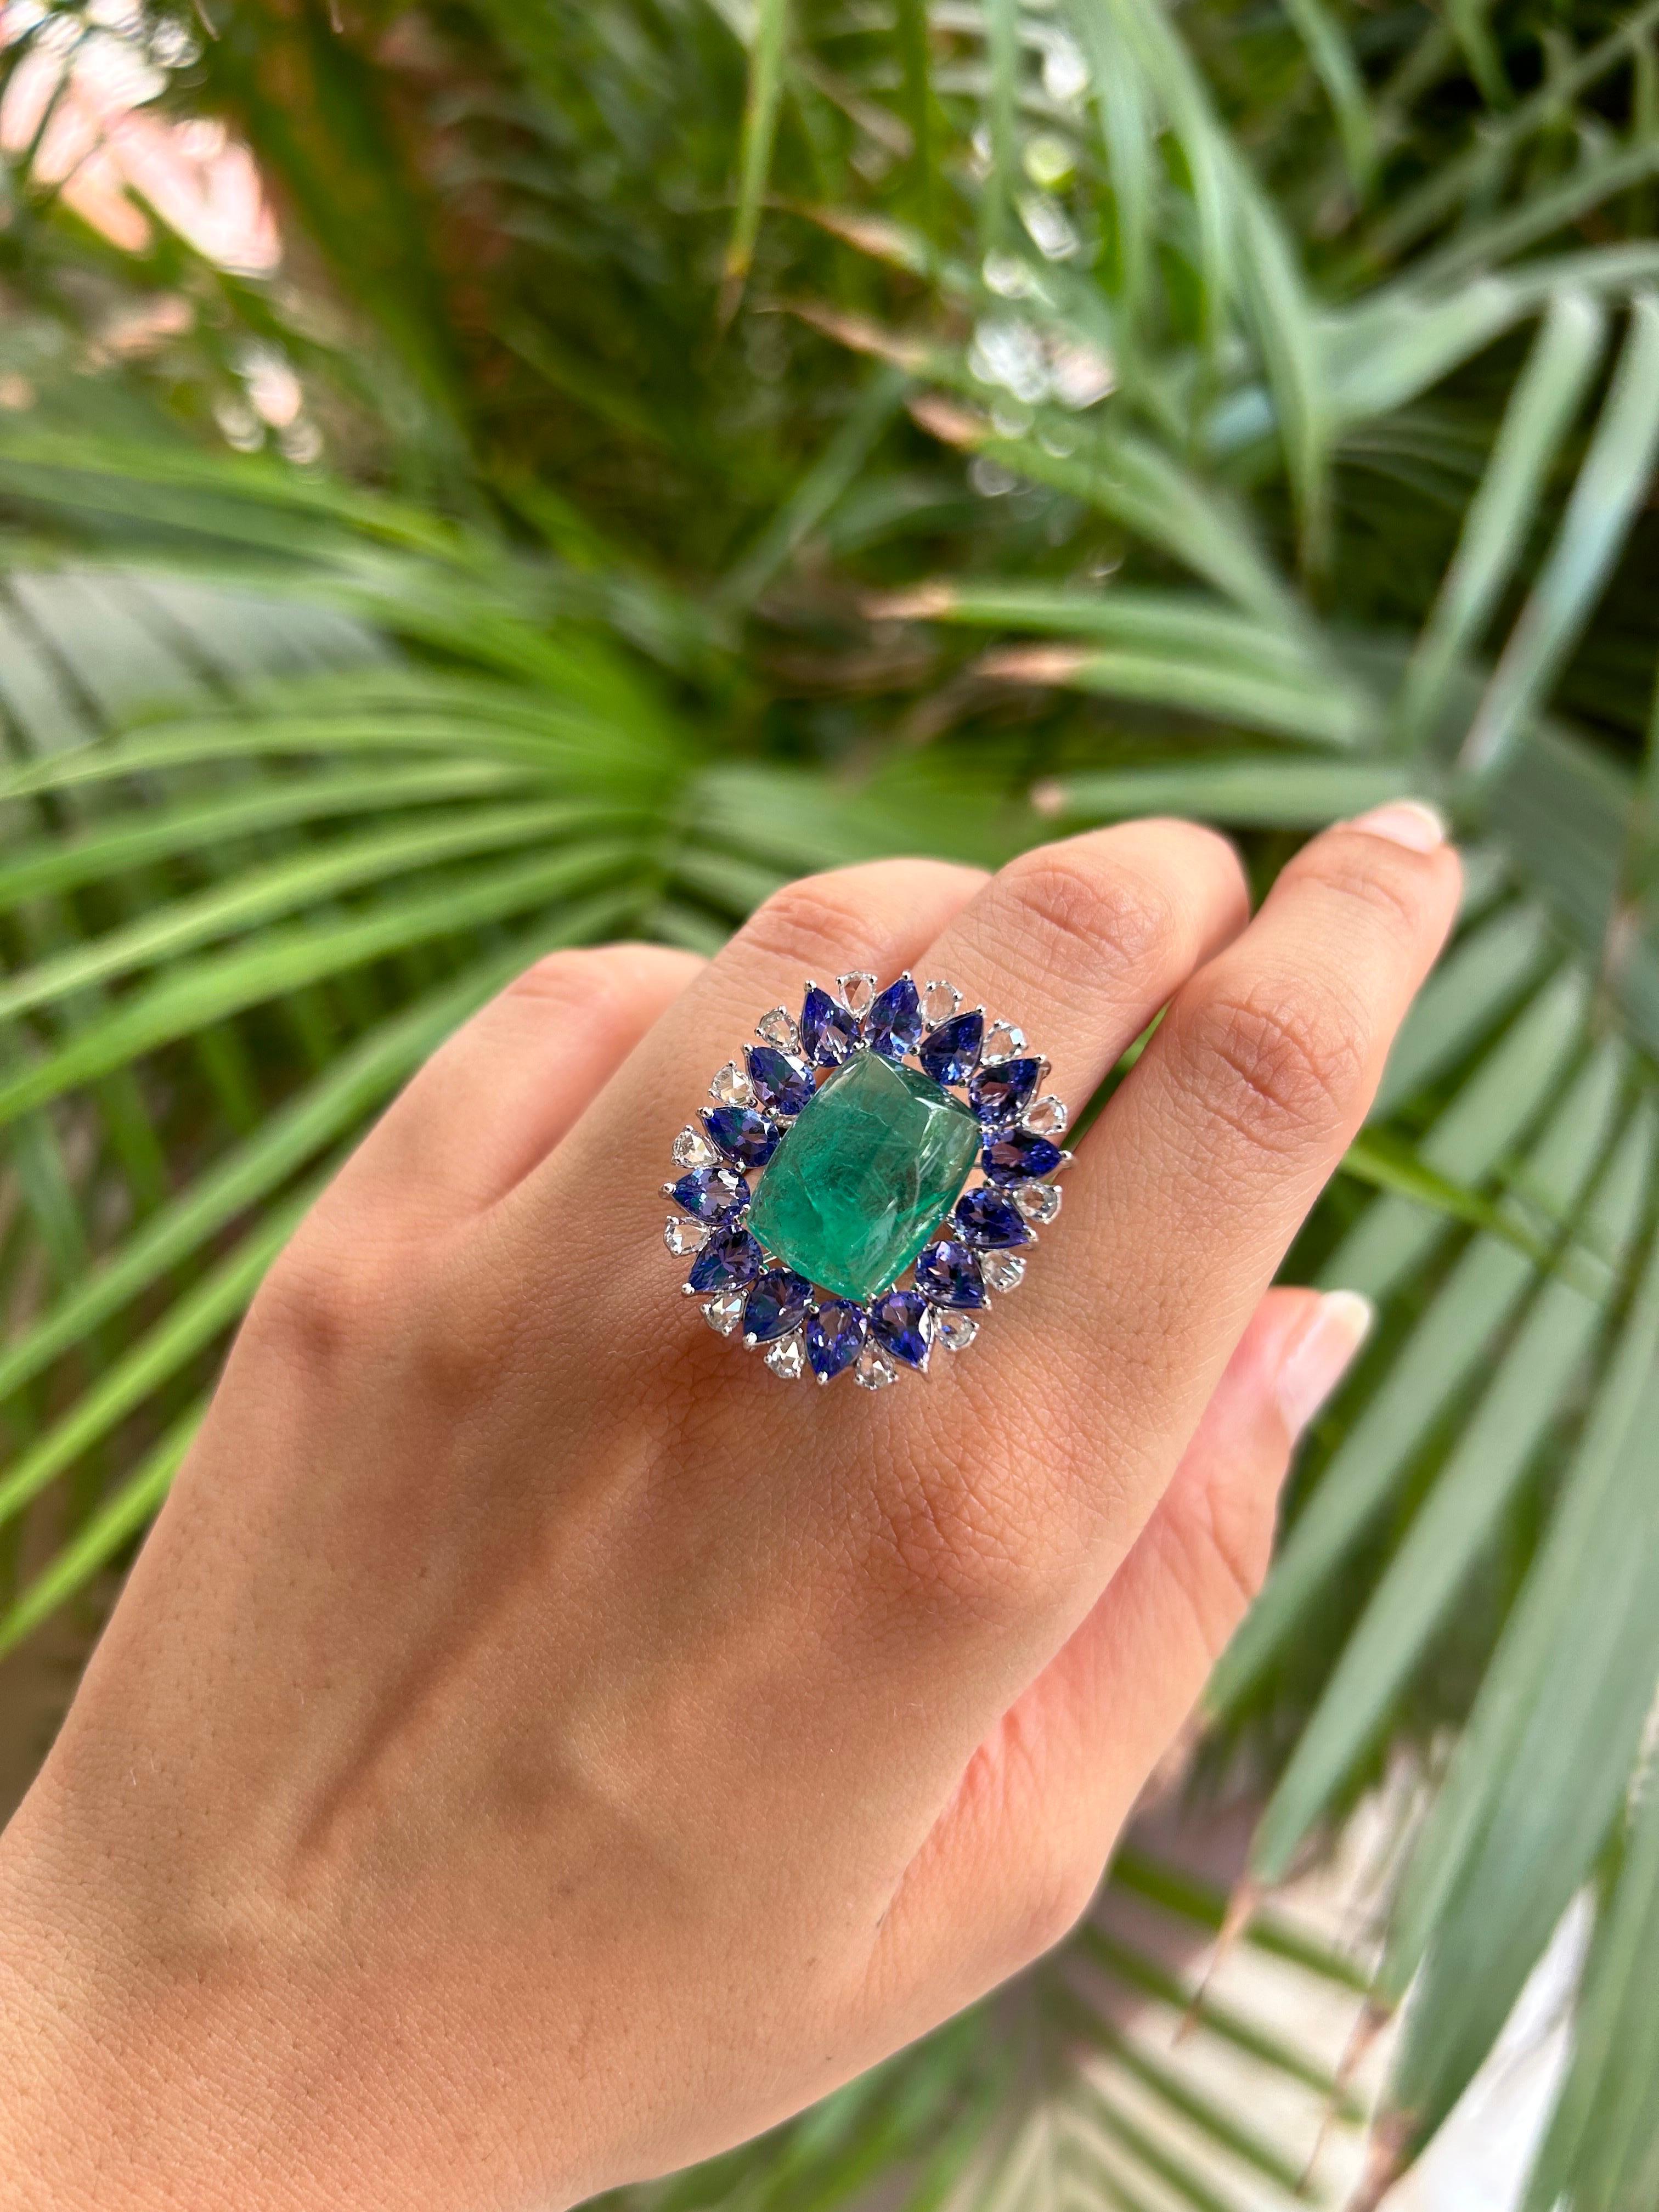 A beautiful 10.53 carat sugarloaf shaped natural Zambian Emerald cocktail ring, with 6.62 carat pear shaped Tanzanites surrounding it. The ring has 0.97 carats white diamonds, and is made in solid 18K White Gold. The ring is currently sized at US 7,